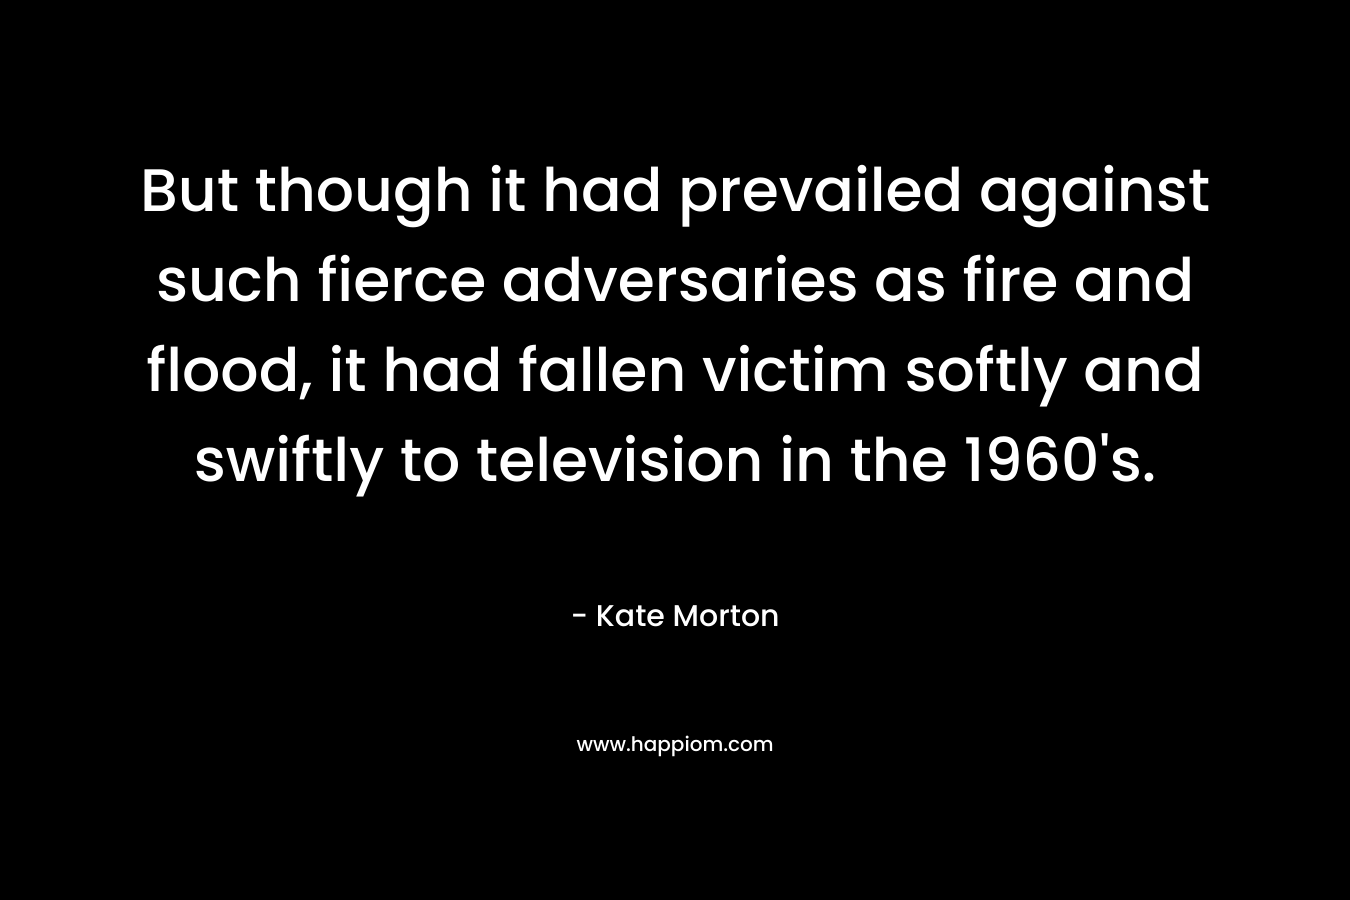 But though it had prevailed against such fierce adversaries as fire and flood, it had fallen victim softly and swiftly to television in the 1960's.